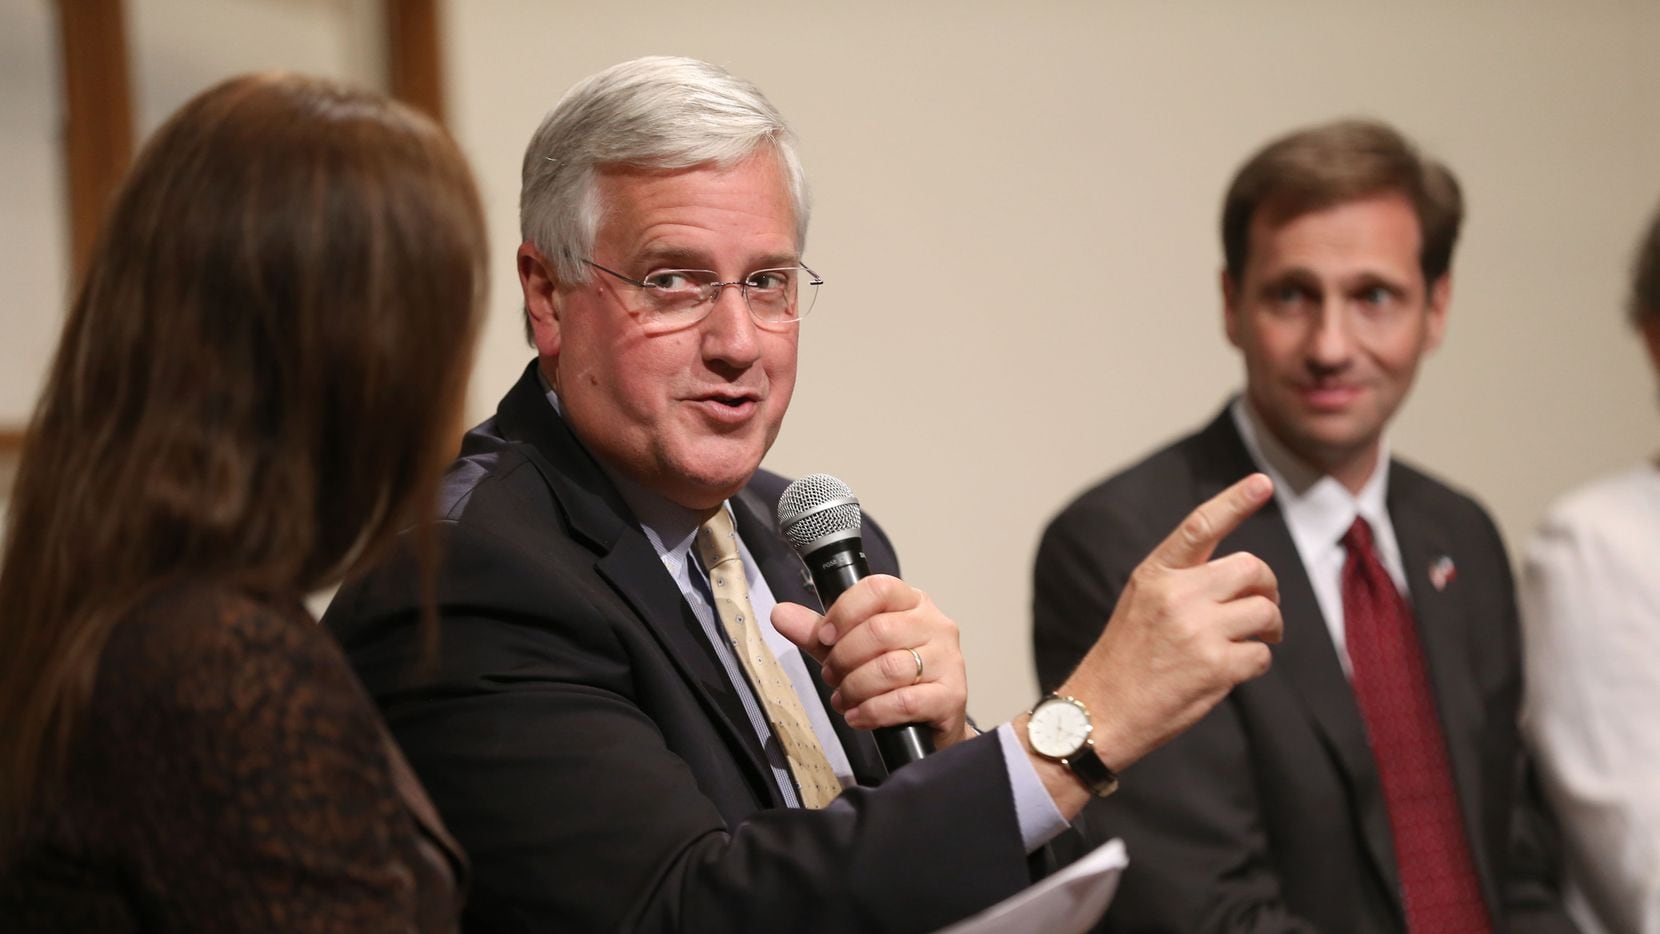 Mike Collier, Democratic candidate for lieutenant governor, spoke during a town hall at...